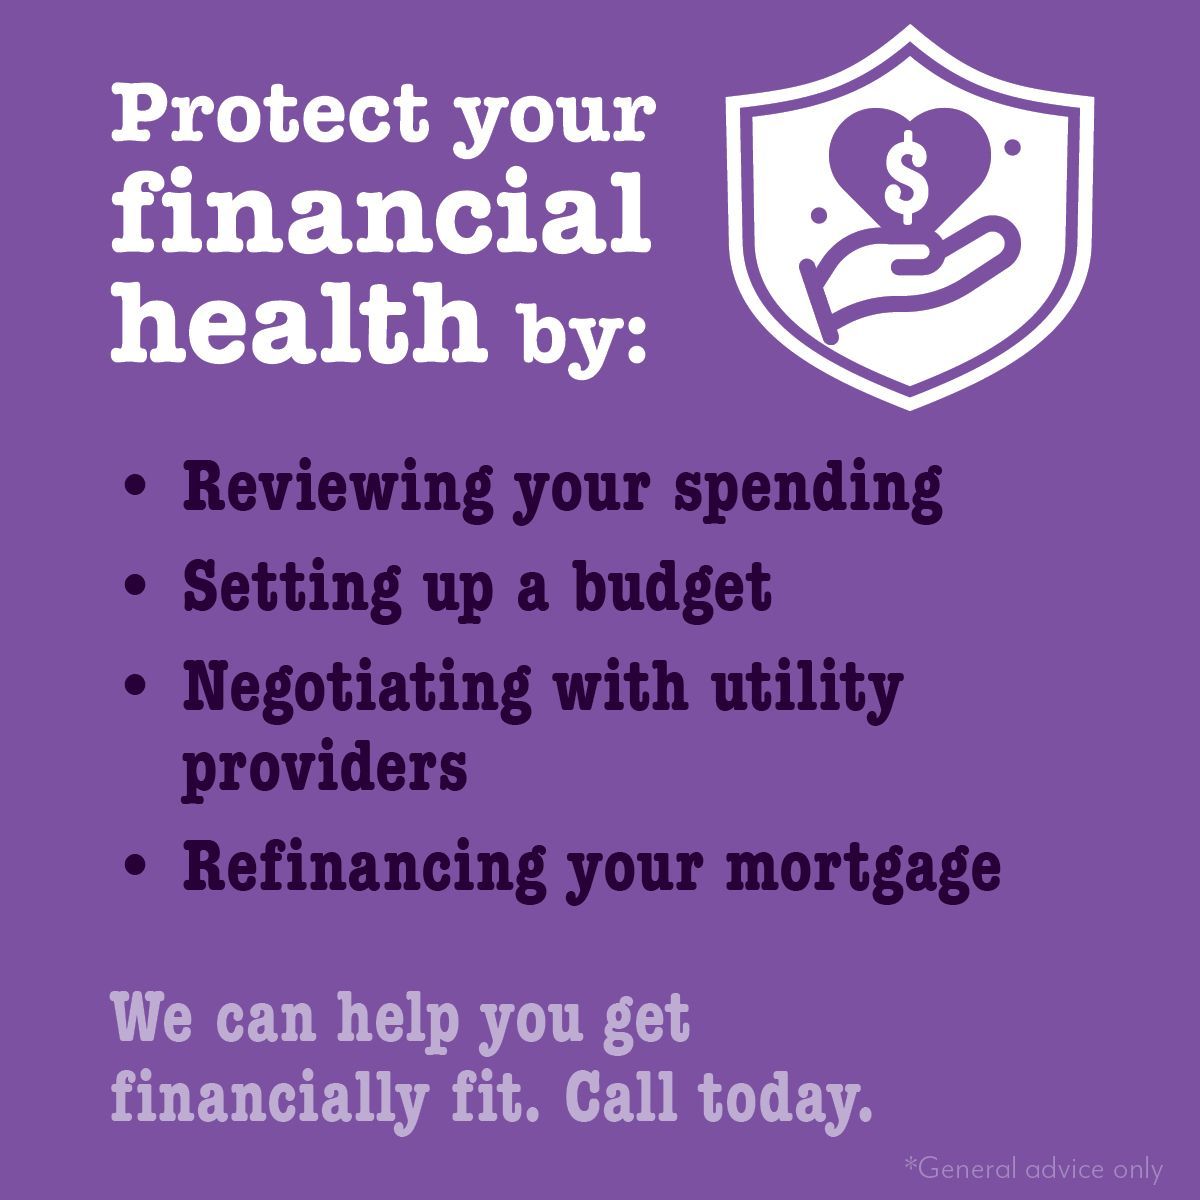 Protect your financial health